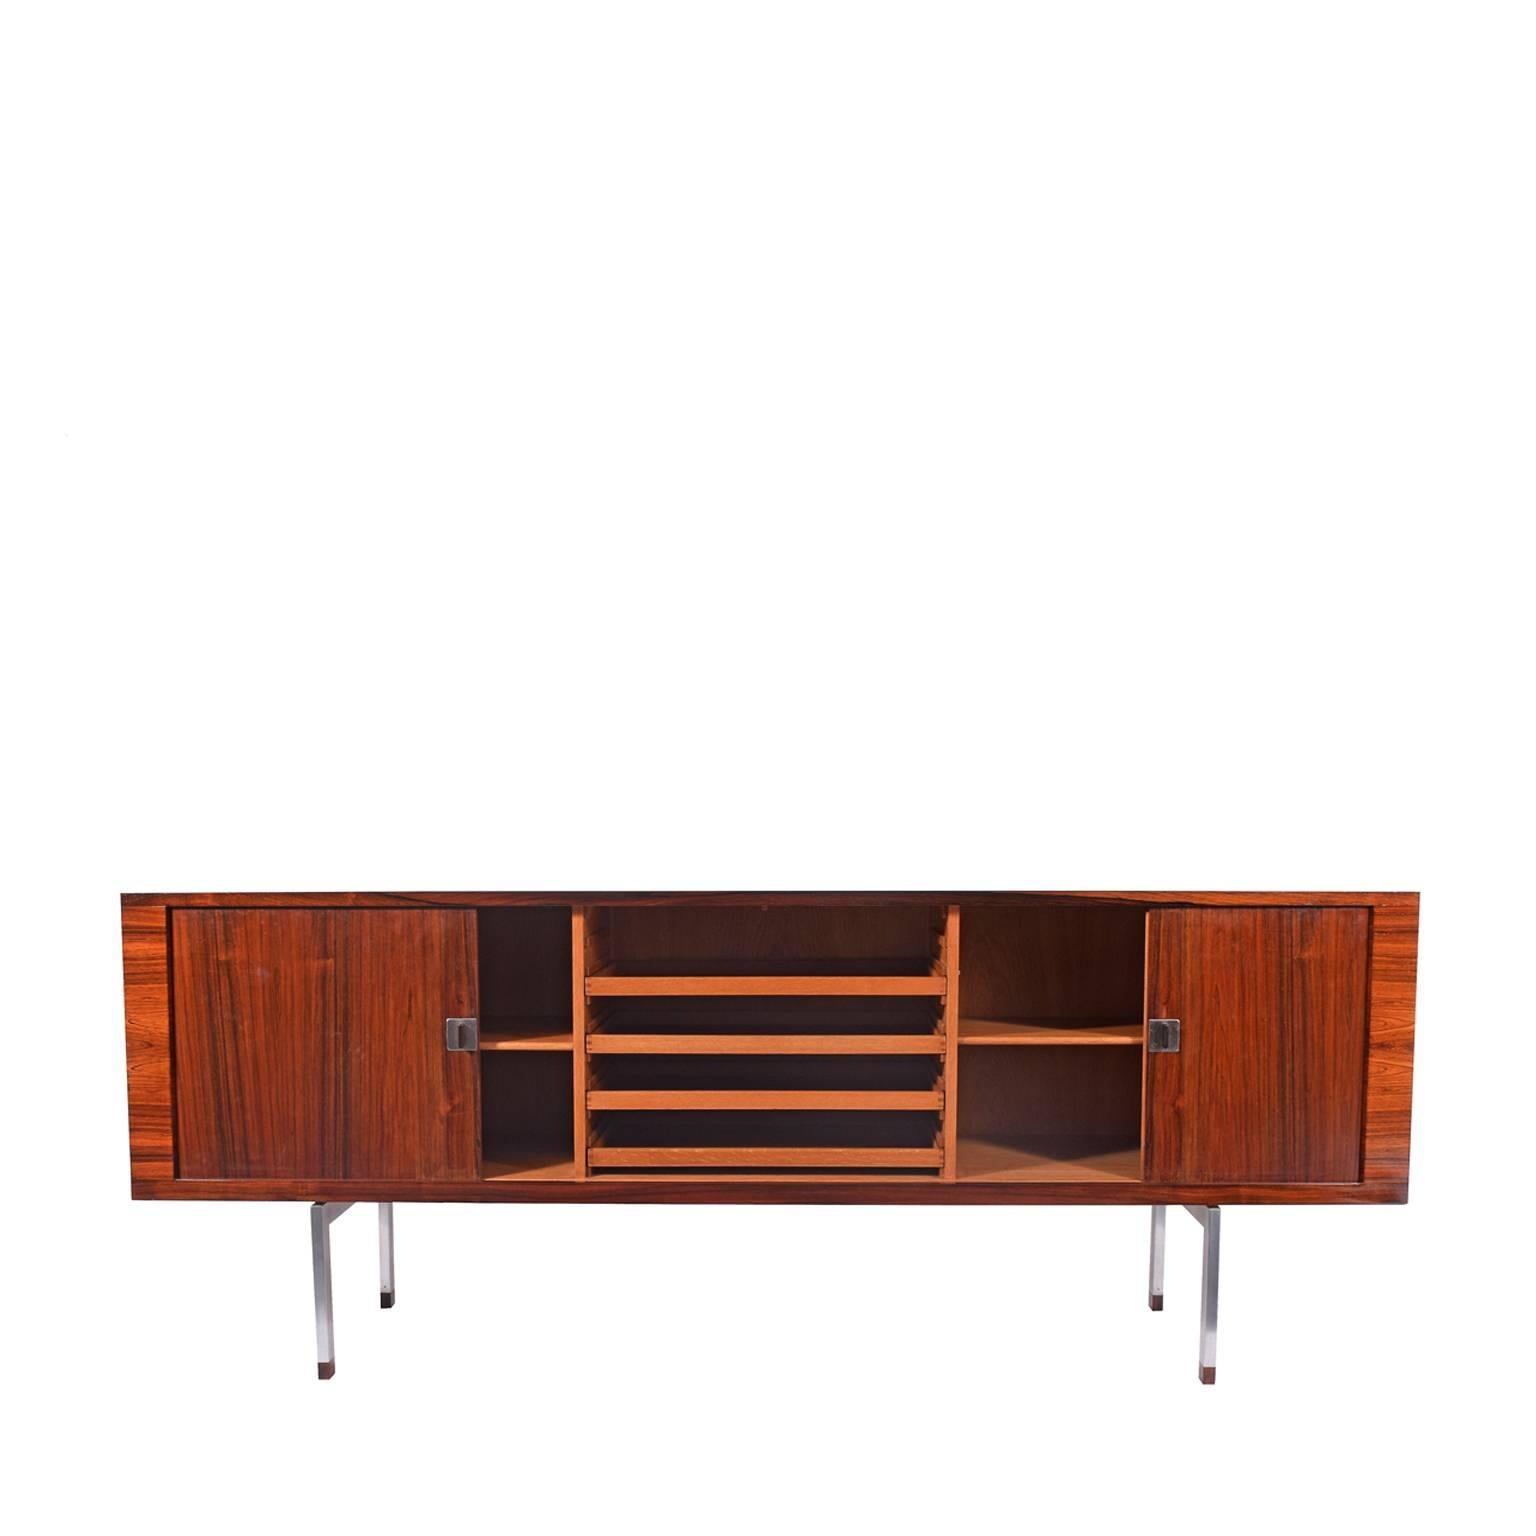 Wegner cabinet in rosewood with chrome legs and rosewood feet. Two adjustable shelves and four trays in the middle in oak. Danish quality manufacture's label, tambour sliding doors.